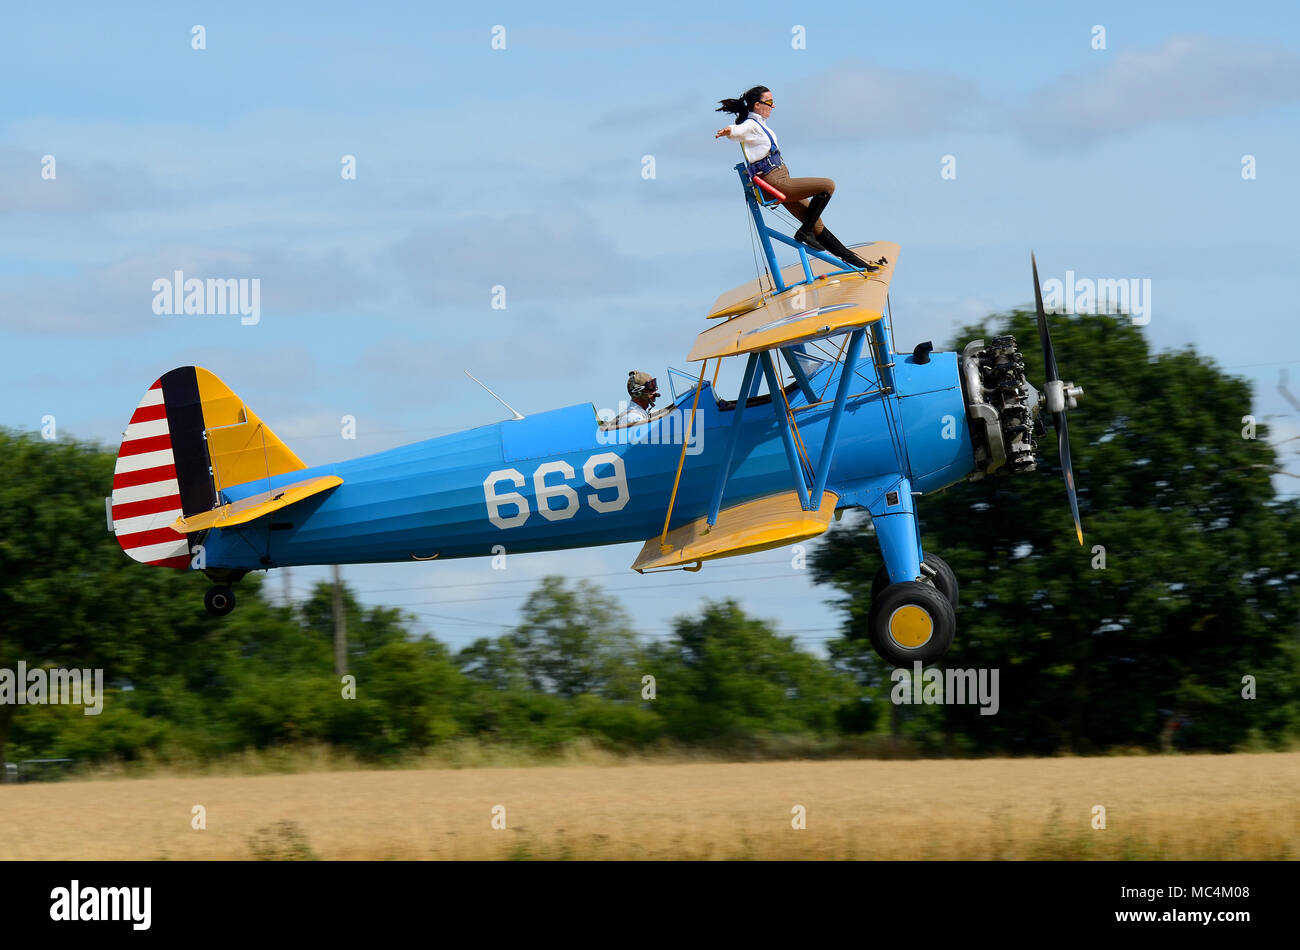 Sarah Niles wingwalking on a Boeing Stearman at Damyns Hall Aerodrome with Aerobatic Tactics. Girl on the wing, wing walking. Close to ground Stock Photo